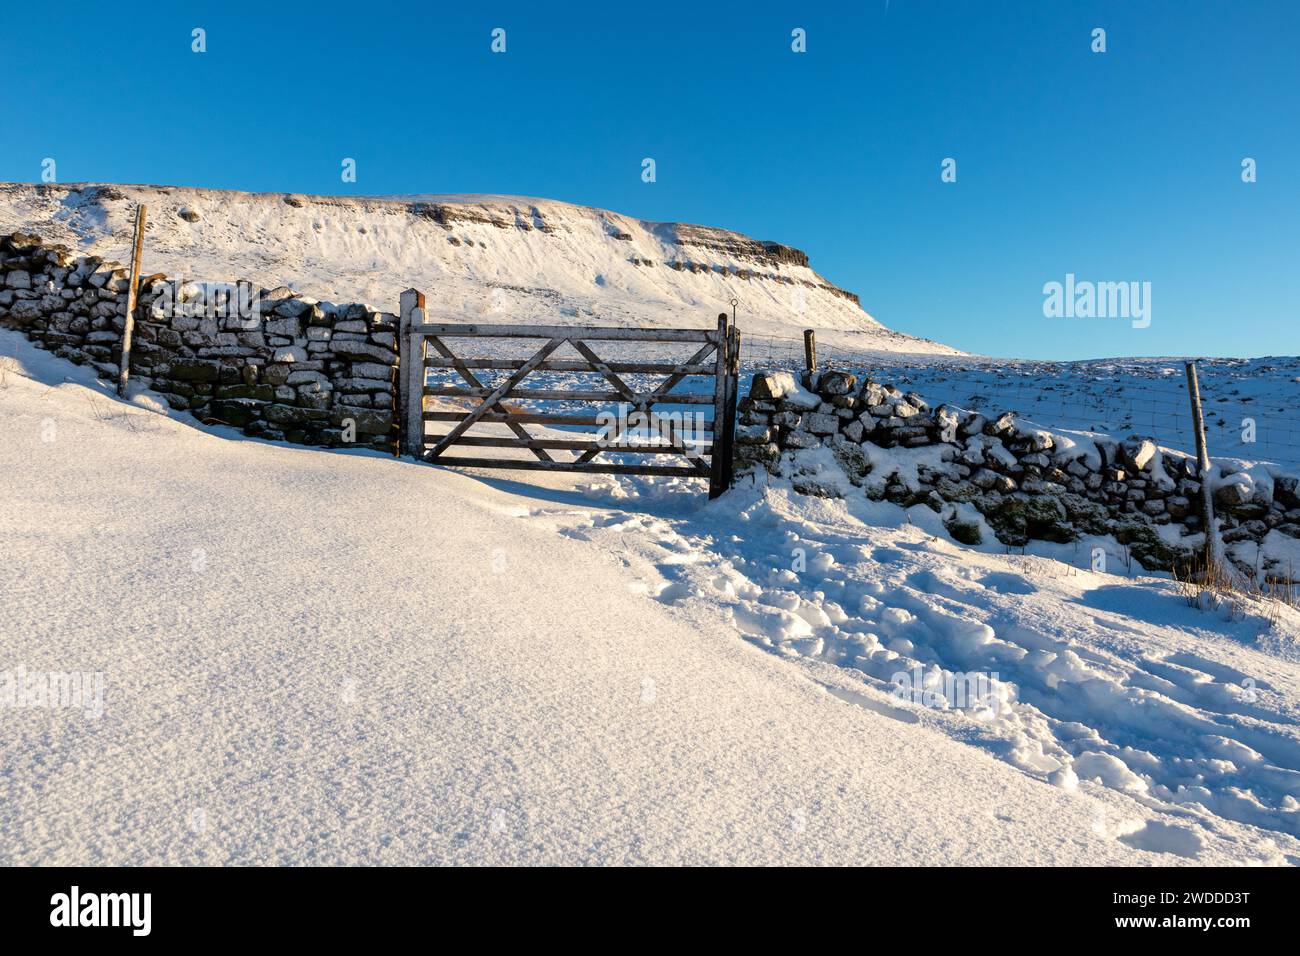 A gate in a drystone wall, with Pen-y-ghent in the background. Taken on a winter day in the Yorkshire Dales National Park in England, with snow. Stock Photo